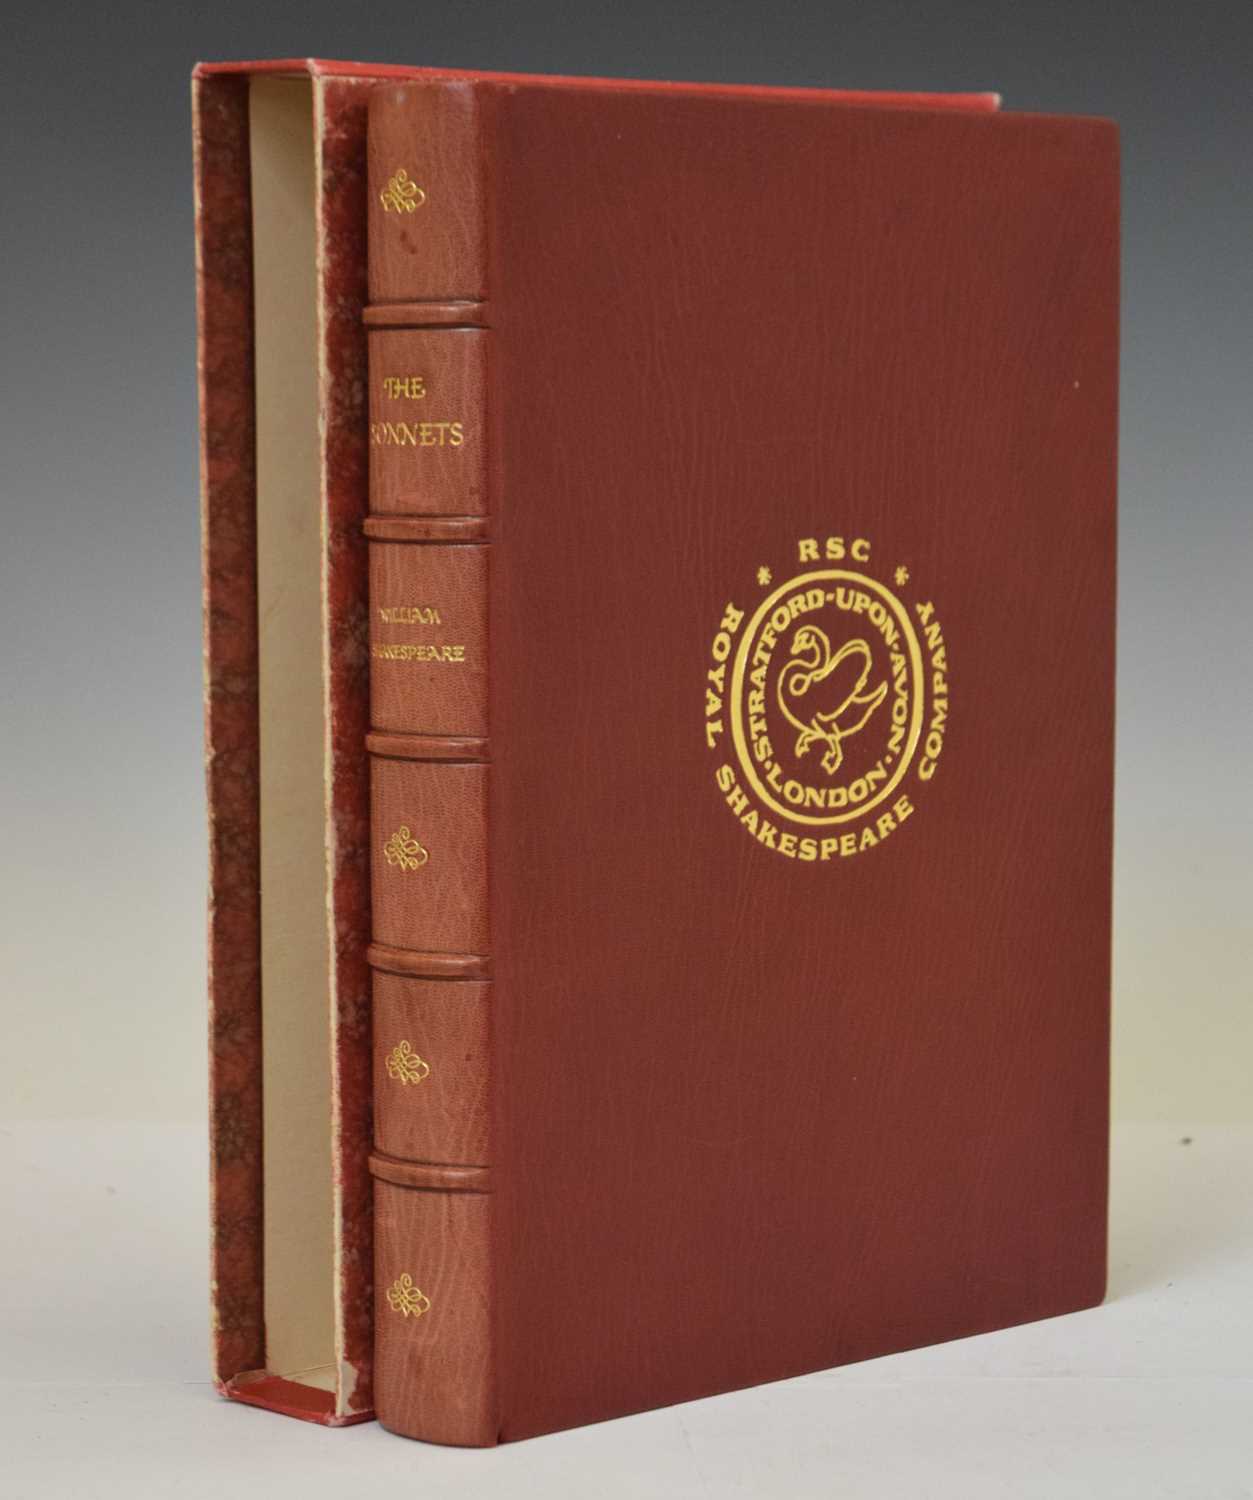 'The Sonnets of William Shakespeare' 1974 - Limited edition signed by Dame Peggy Ashcroft